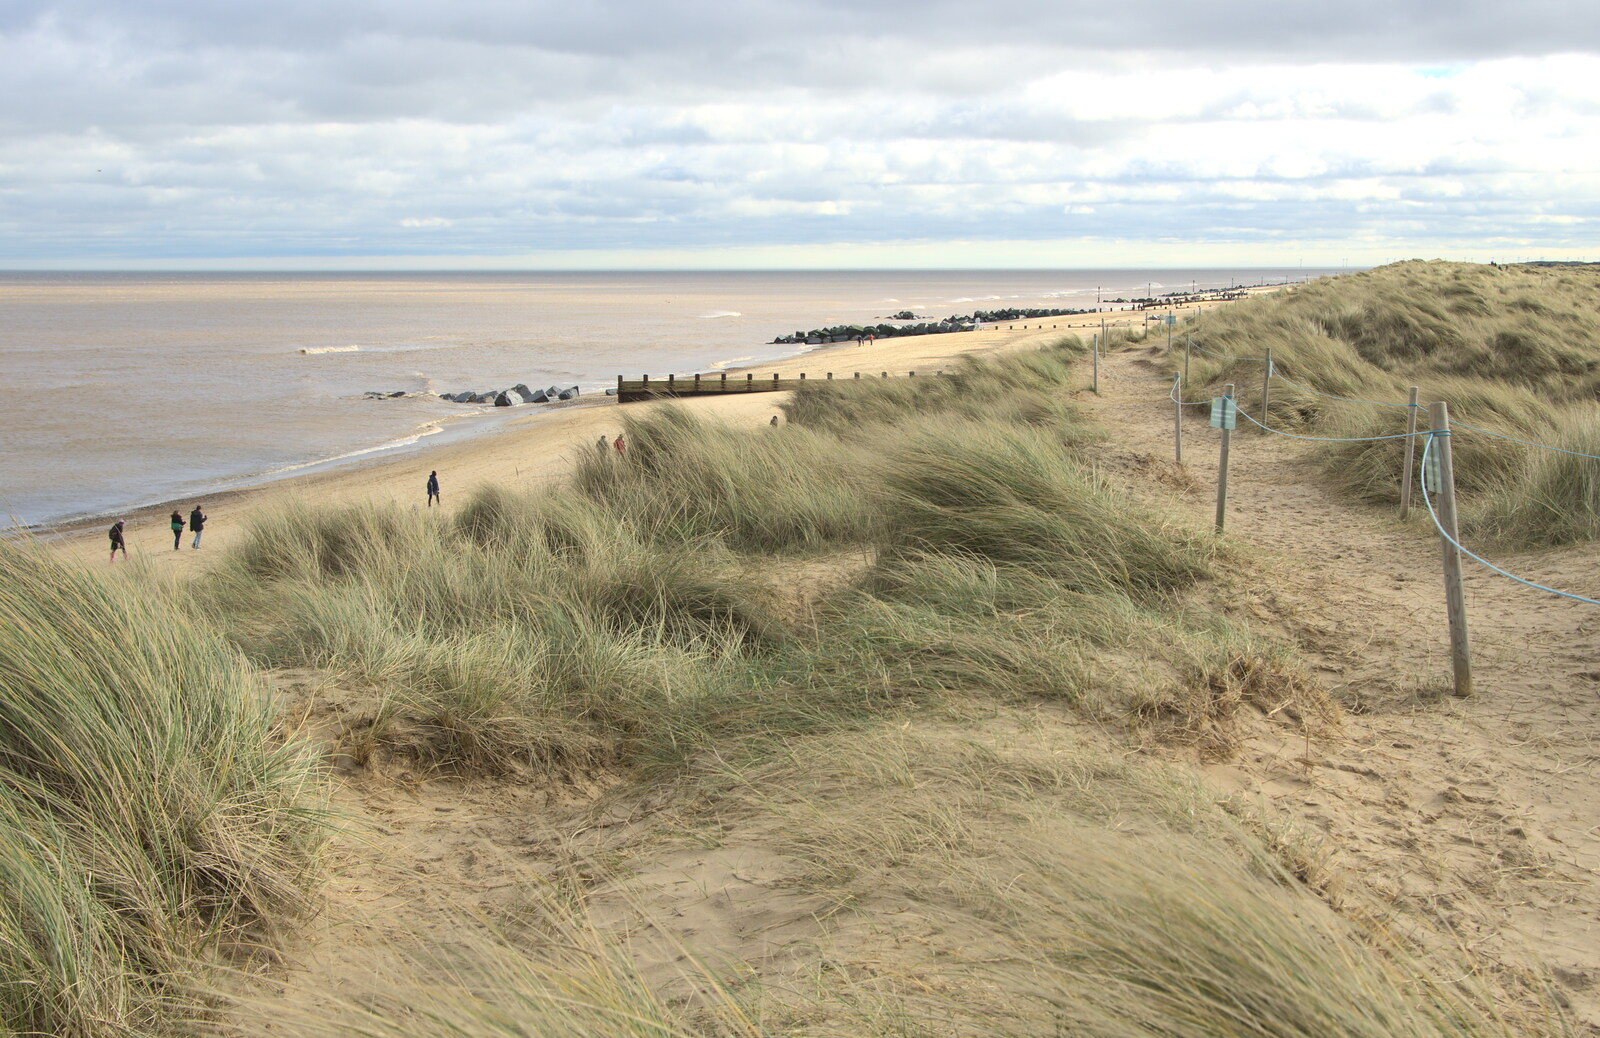 The dunes of Horsey Gap from The Seals of Horsey Gap, Norfolk - 21st February 2016